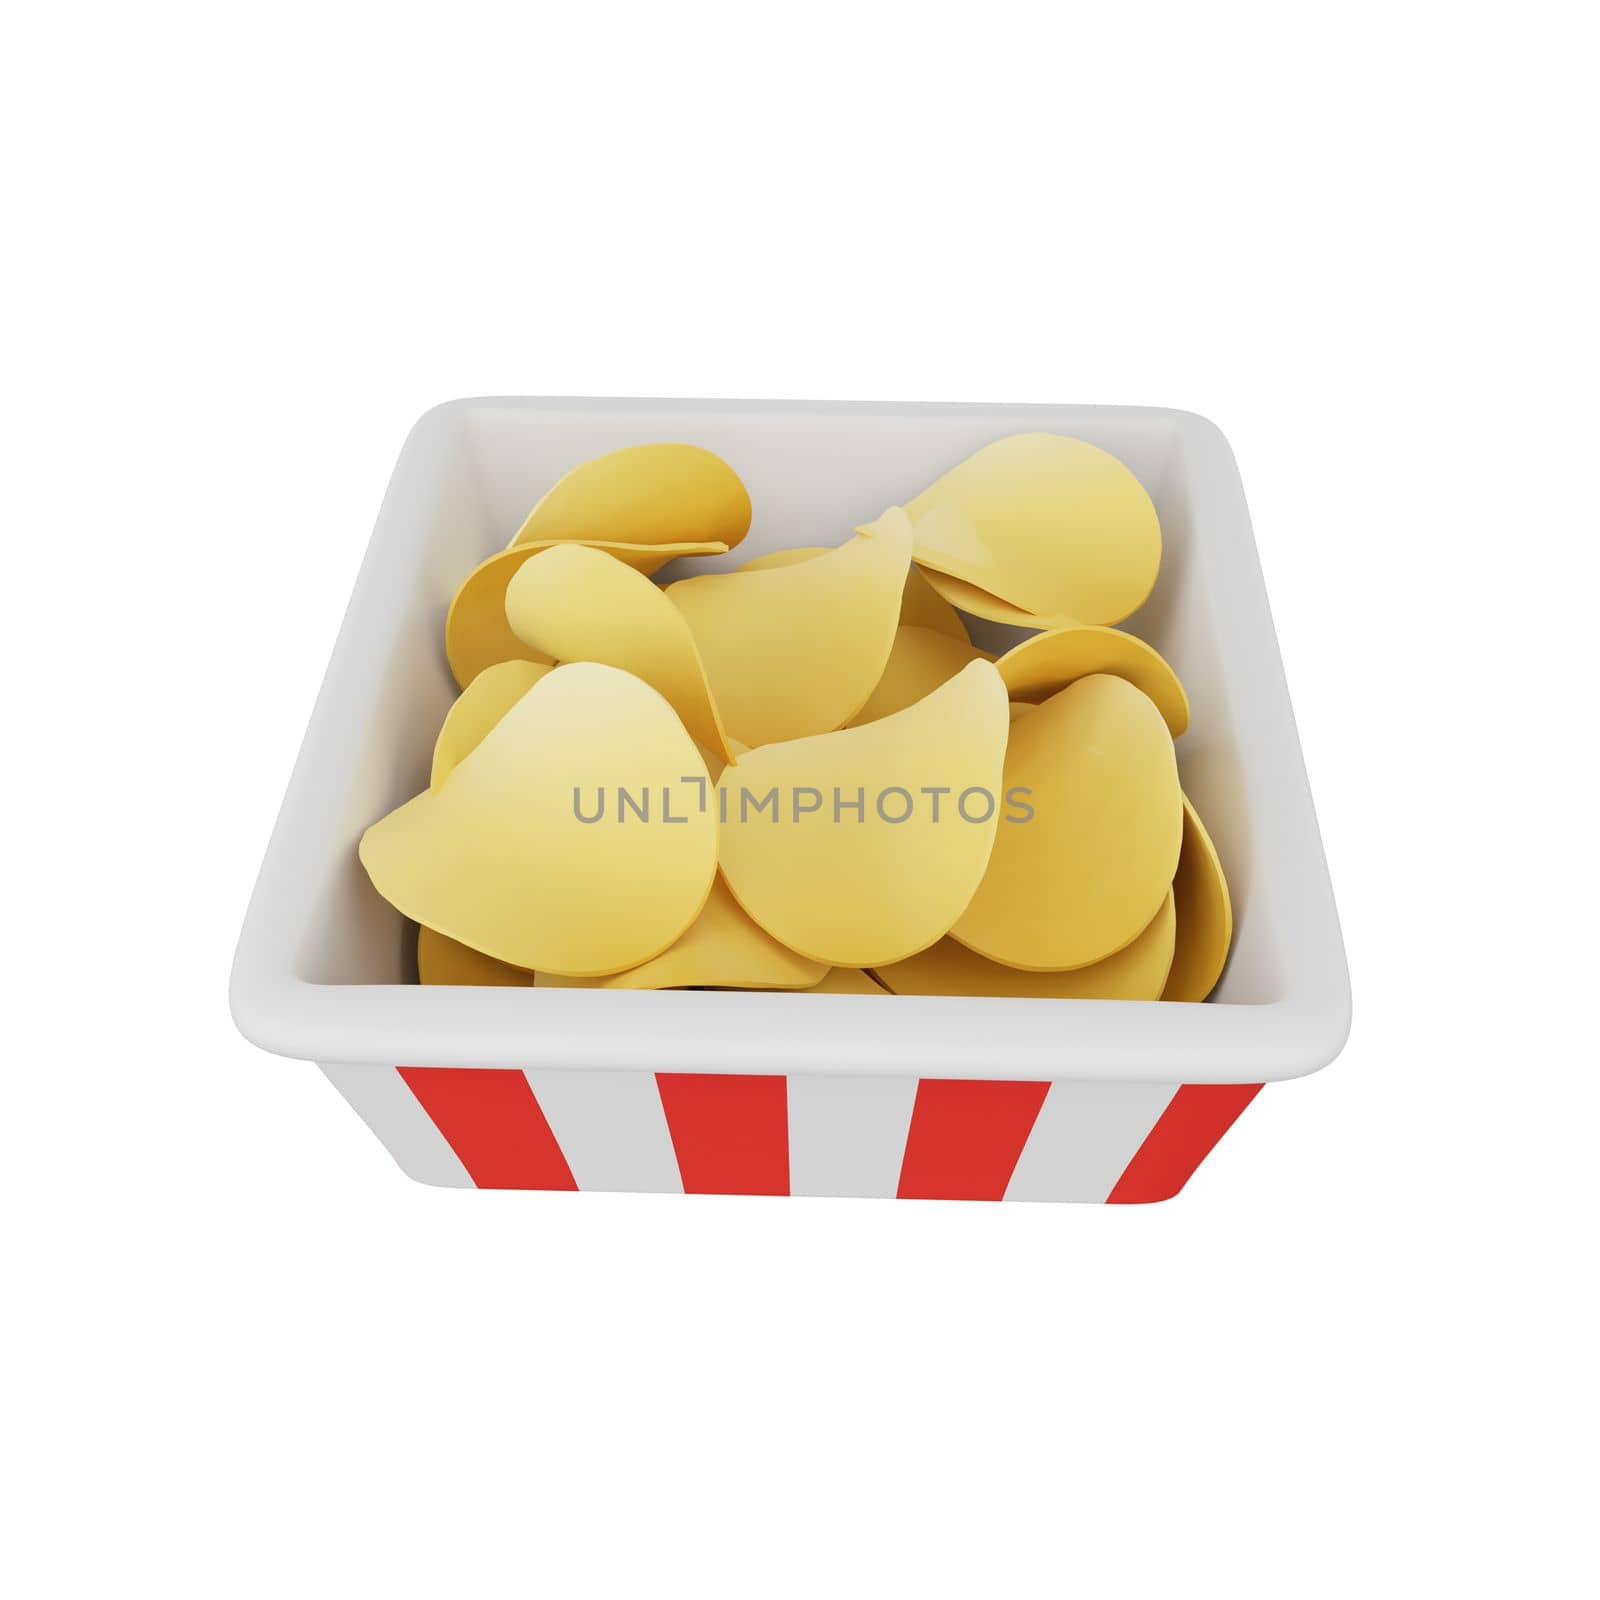 3d rendering of potato chips fast food icon